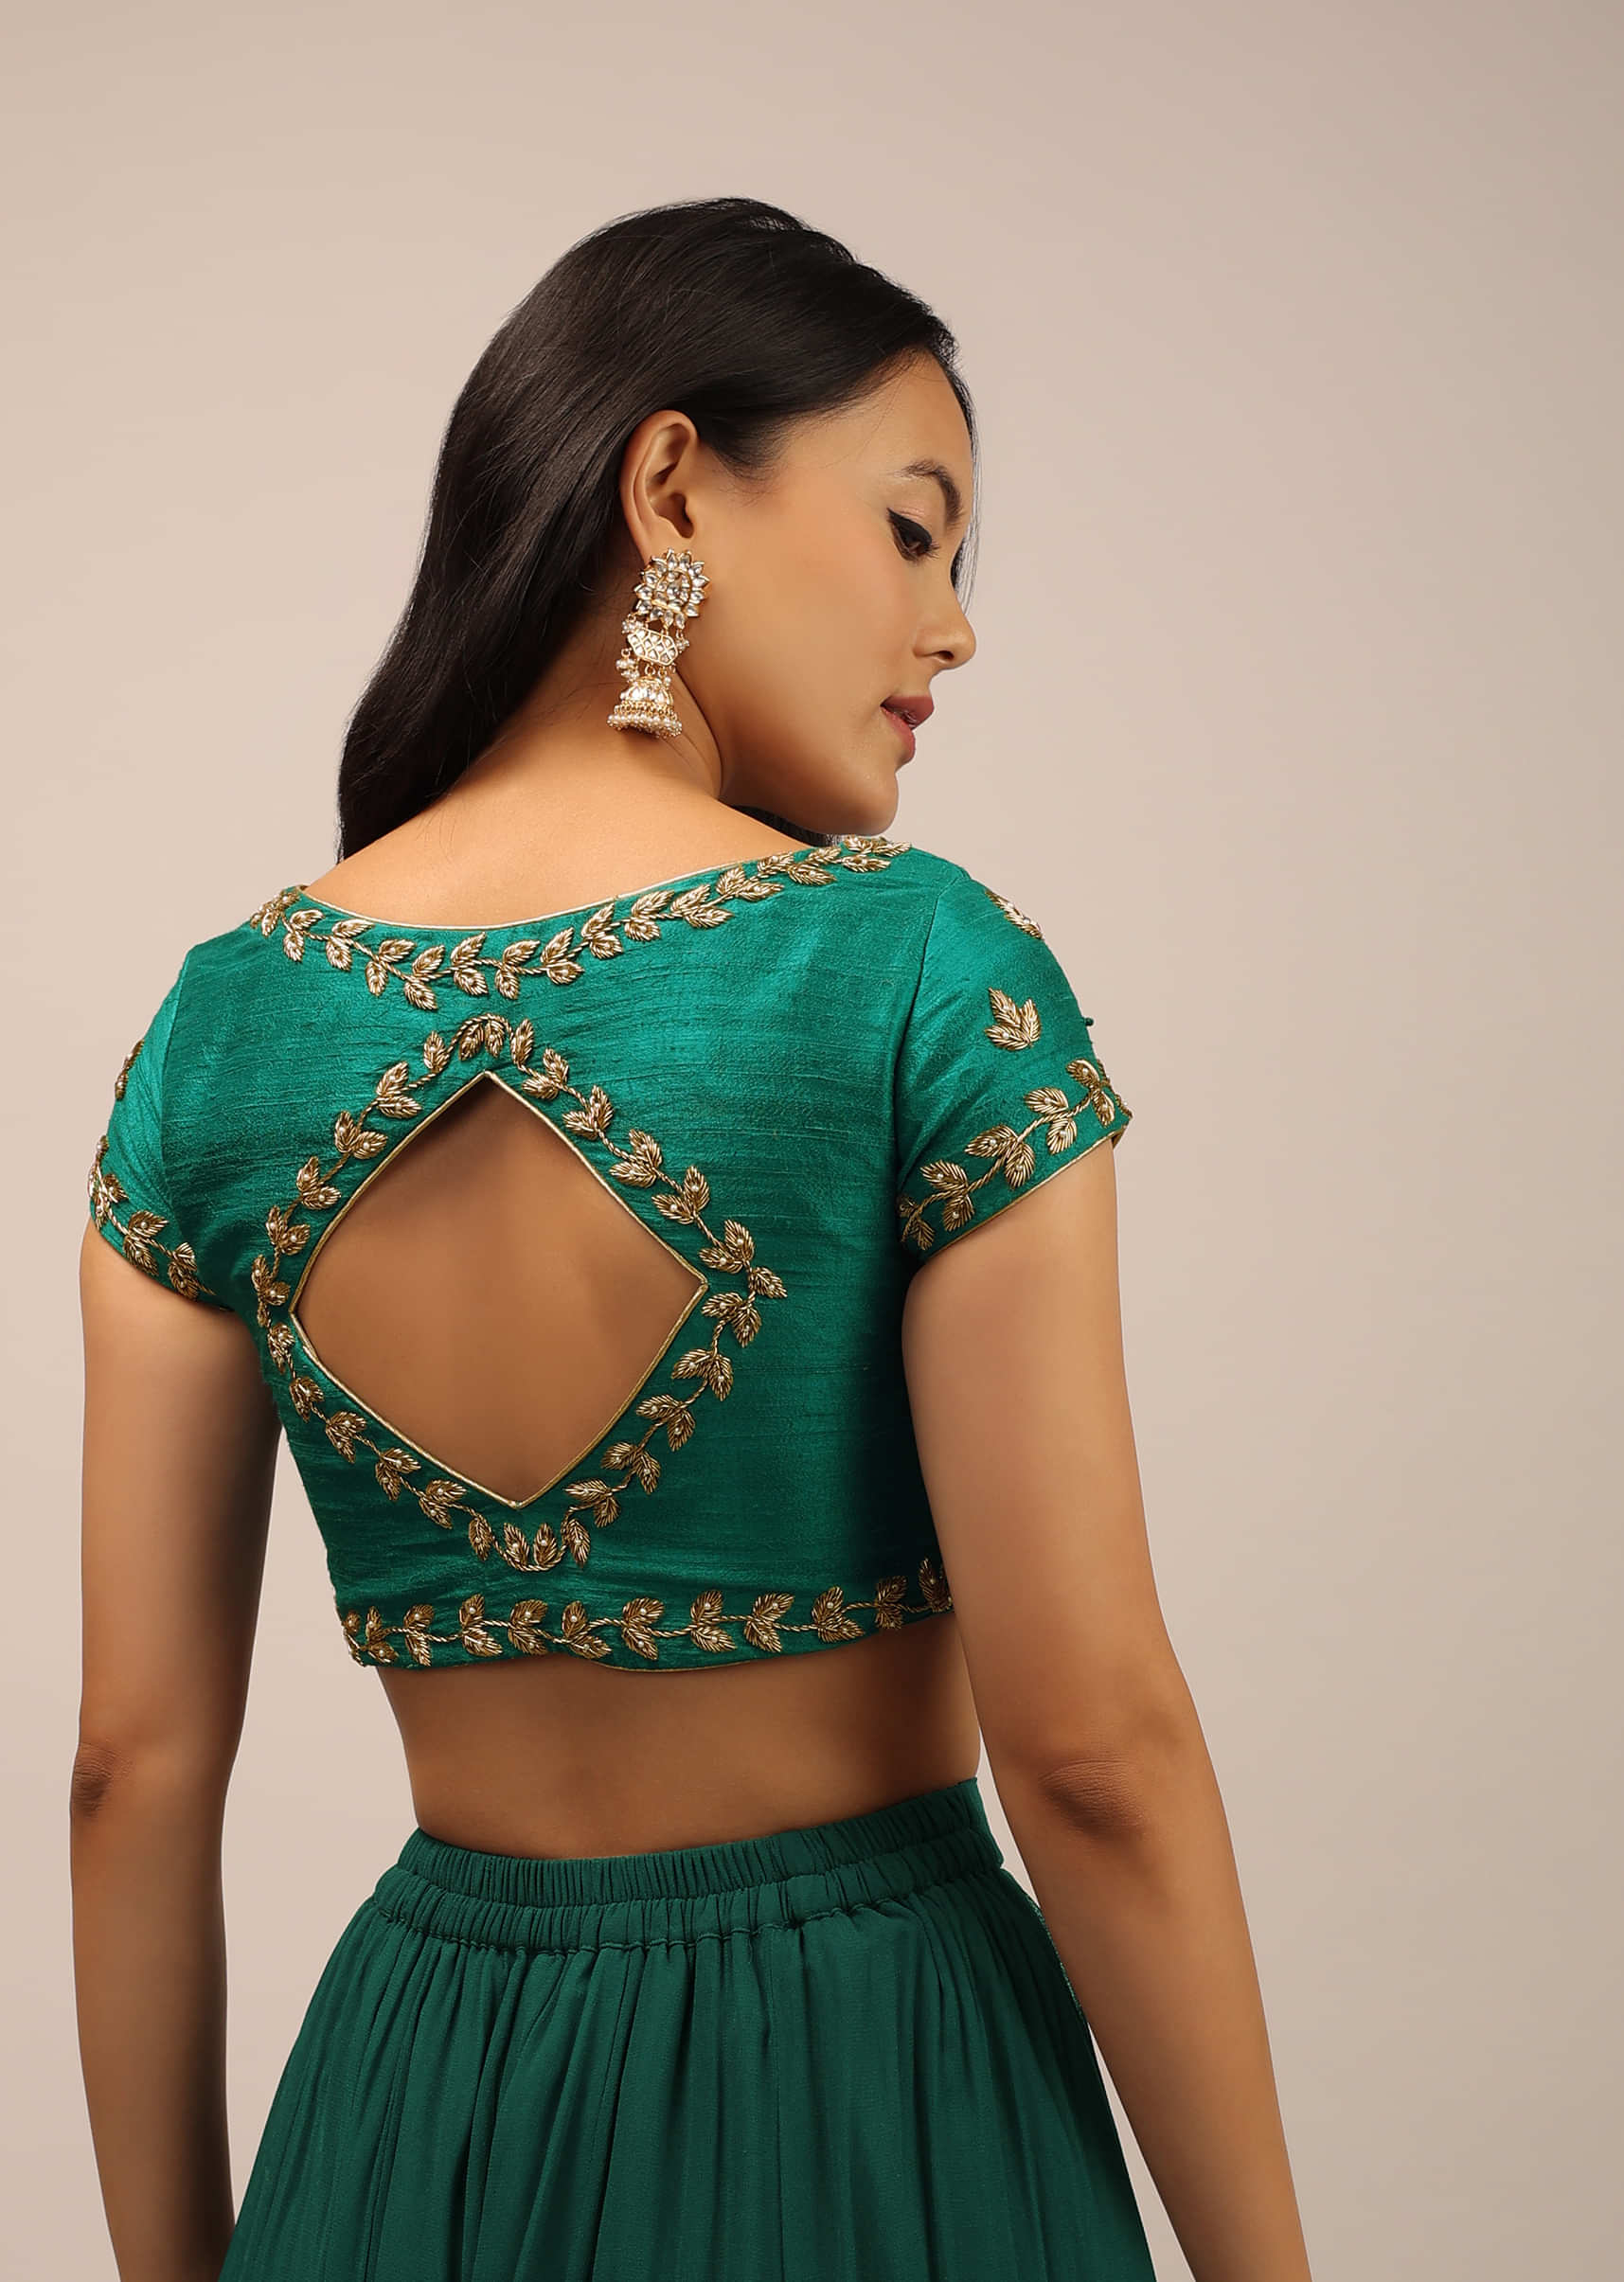 Peacock Green Blouse In Raw Silk With Zardosi Embroidery And A Diamond Cut Out On The Back